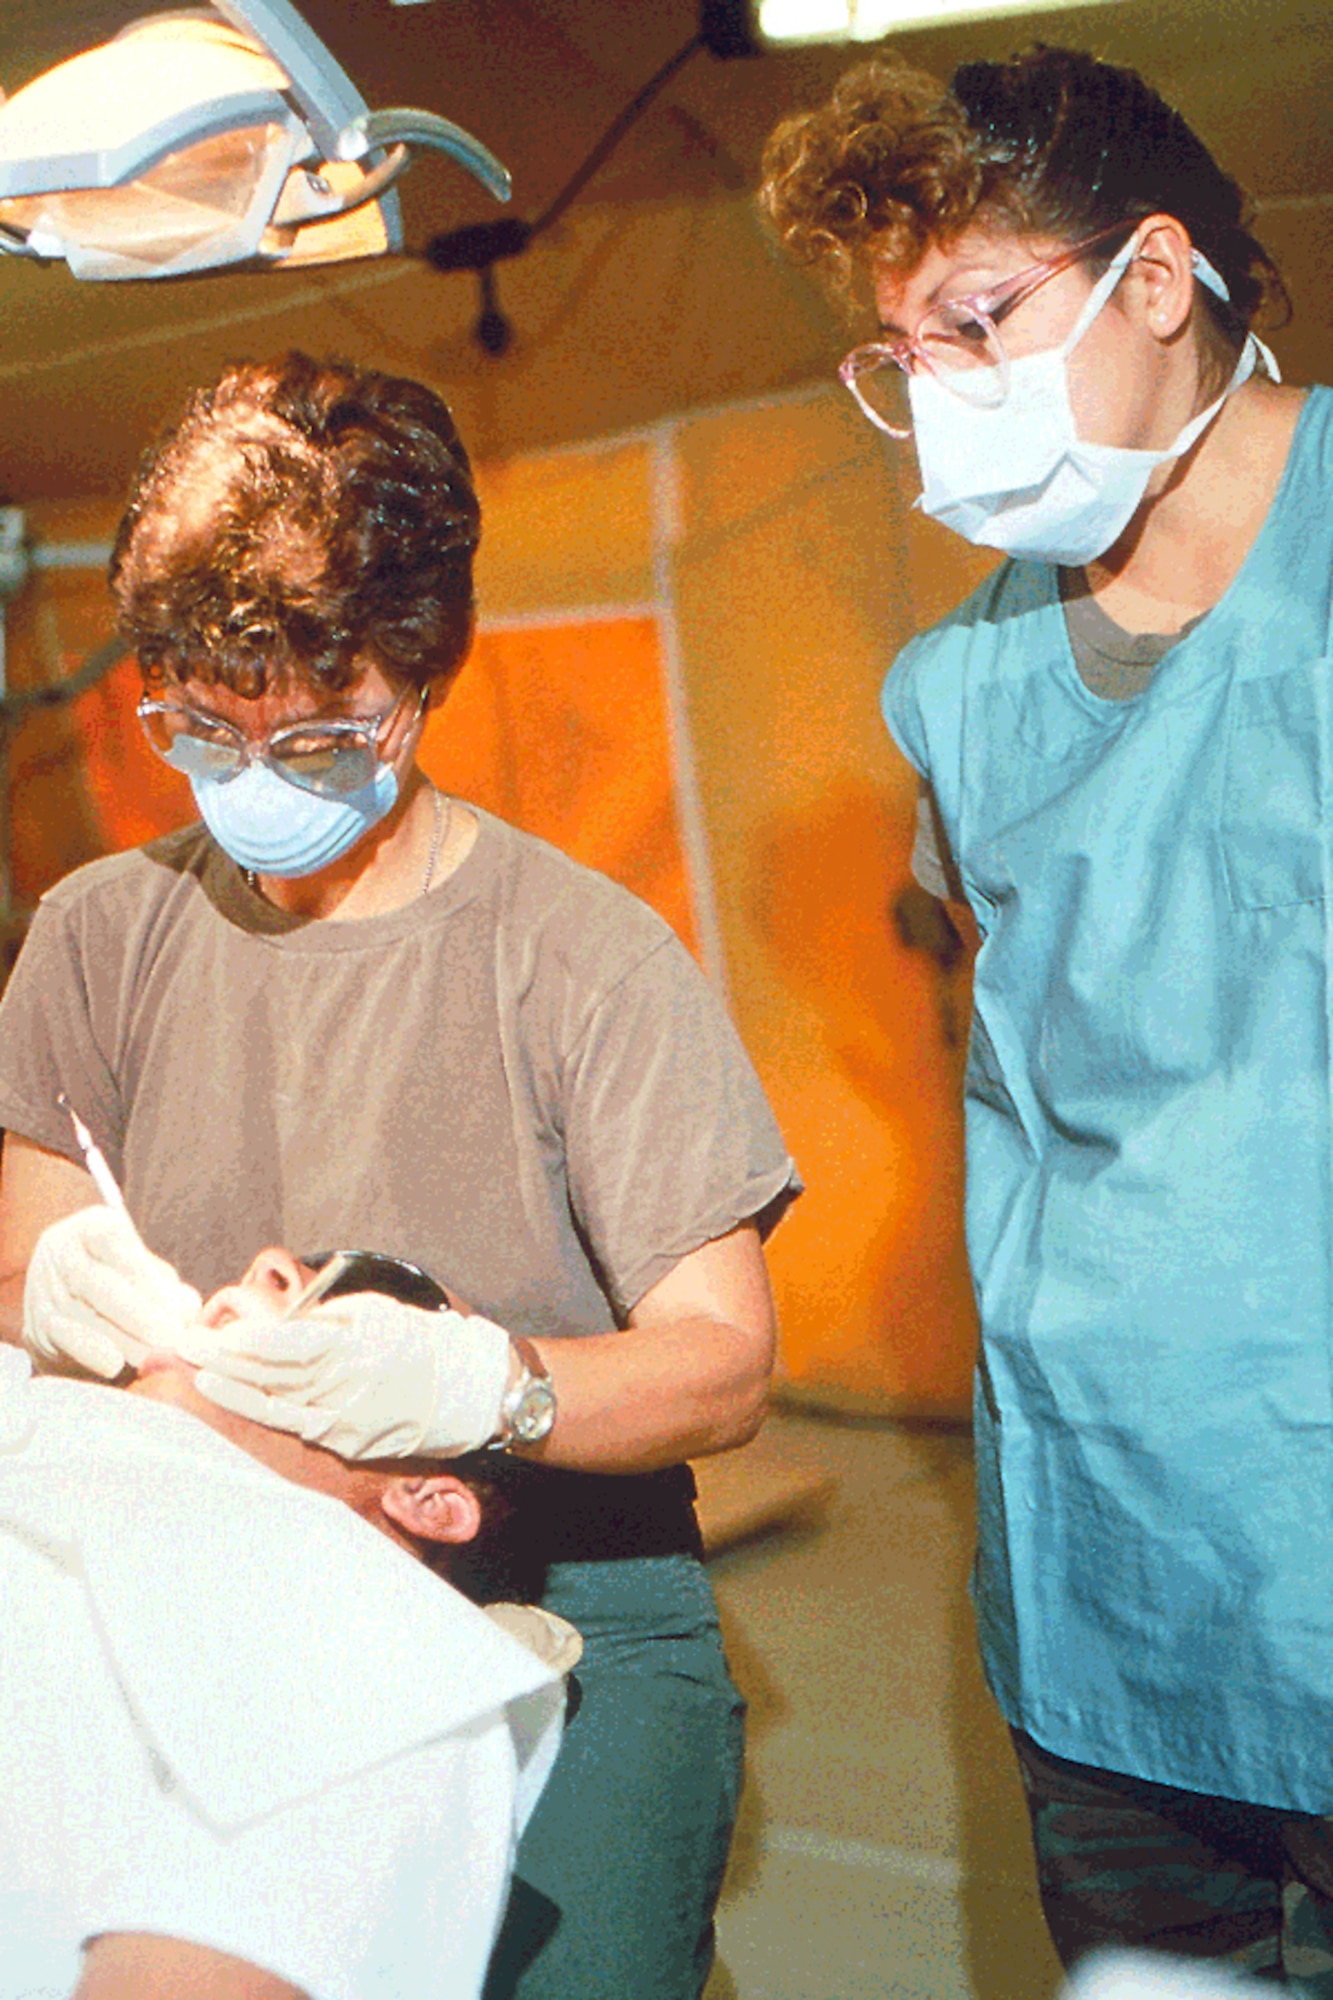 Dental technicians provide care at a field hospital during Operation Desert Shield.